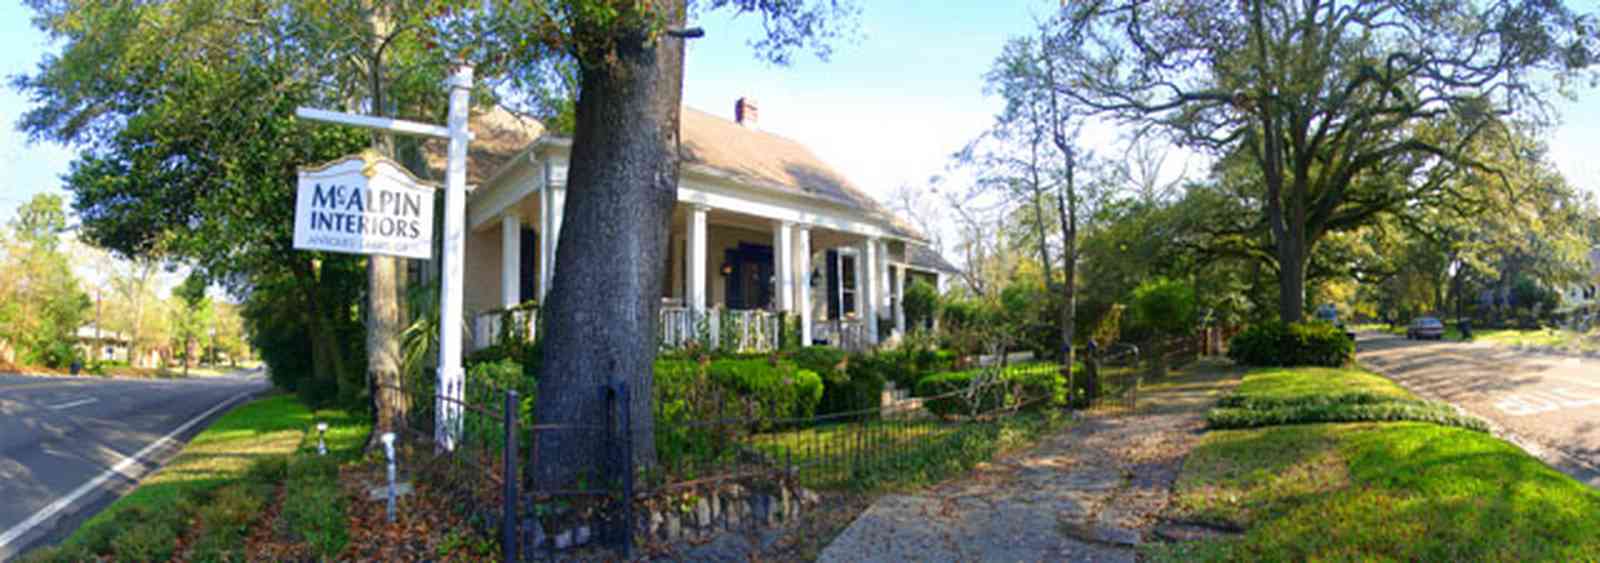 East-Hill:-McAlpin-Shop_11.jpg:  colonial home, oak tree, 9th avenue, traditional style, 